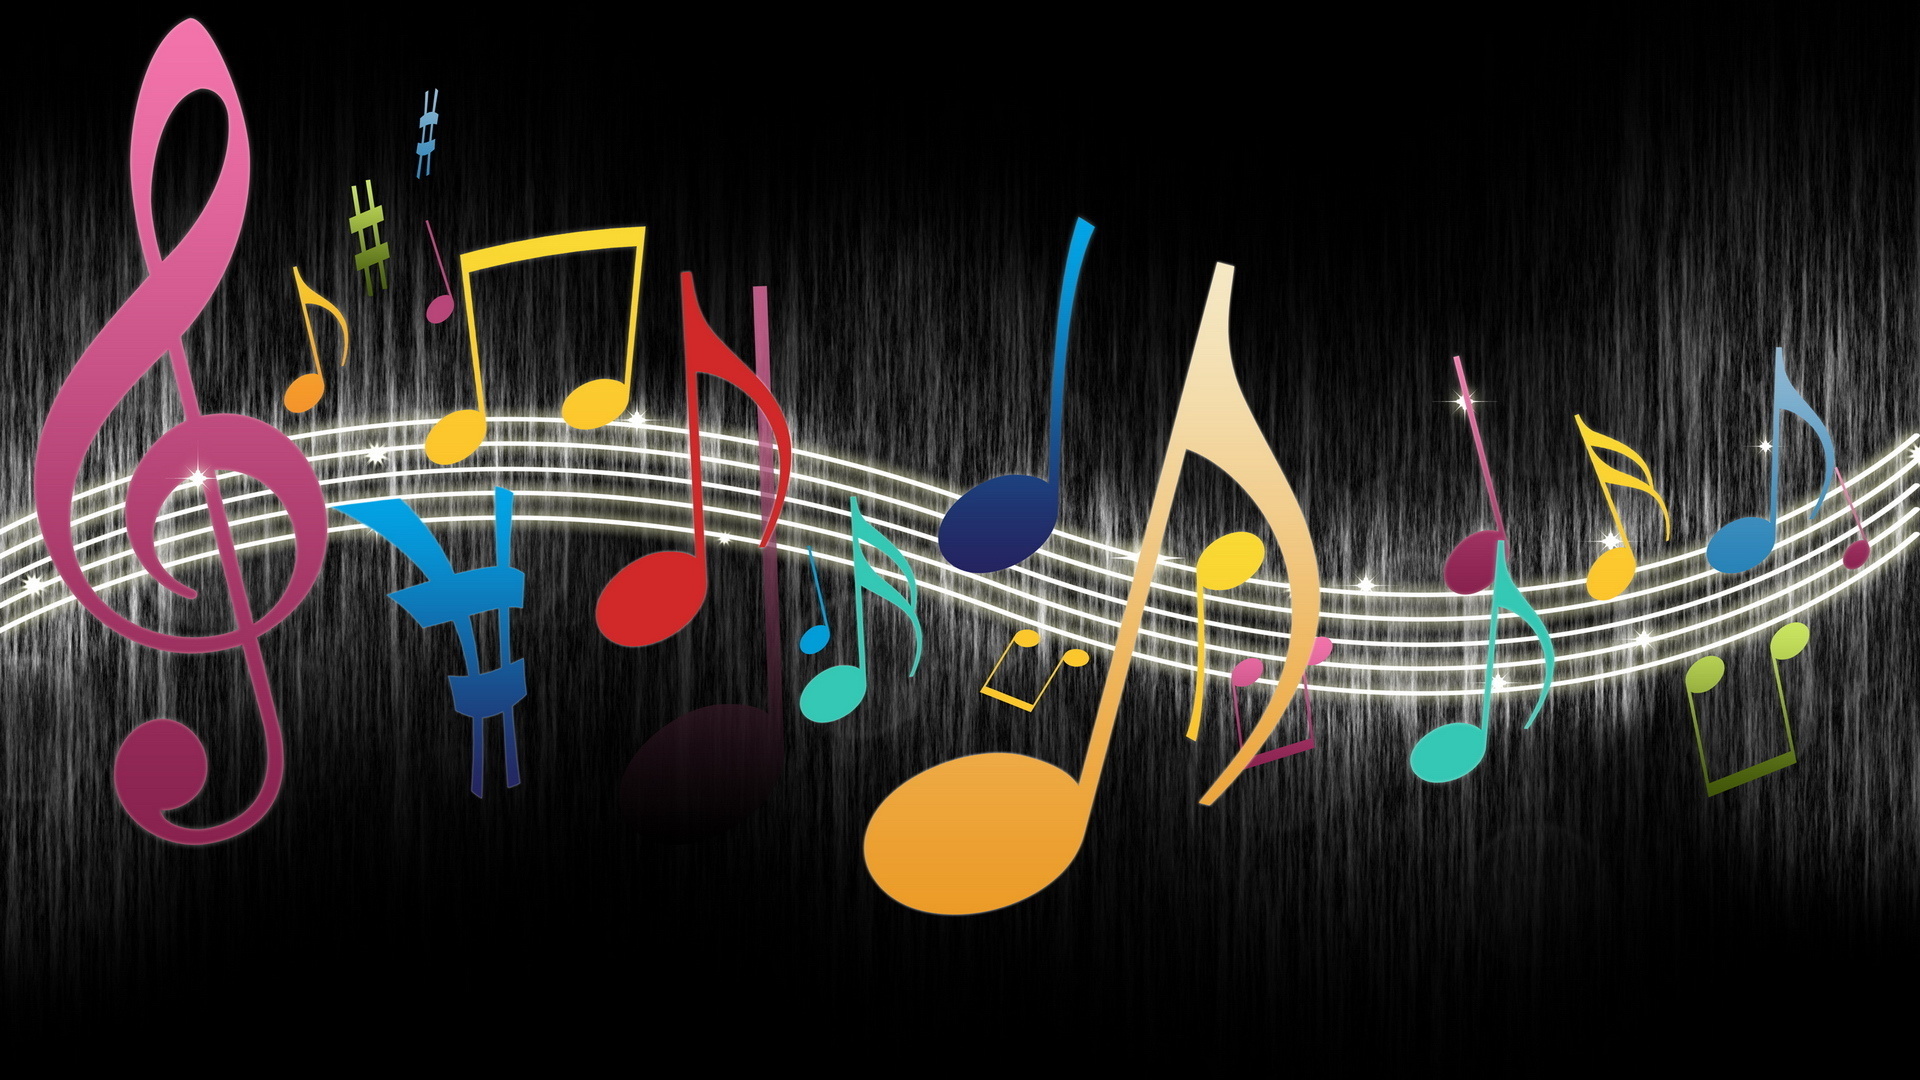 Colorful Music Notes - wallpaper.